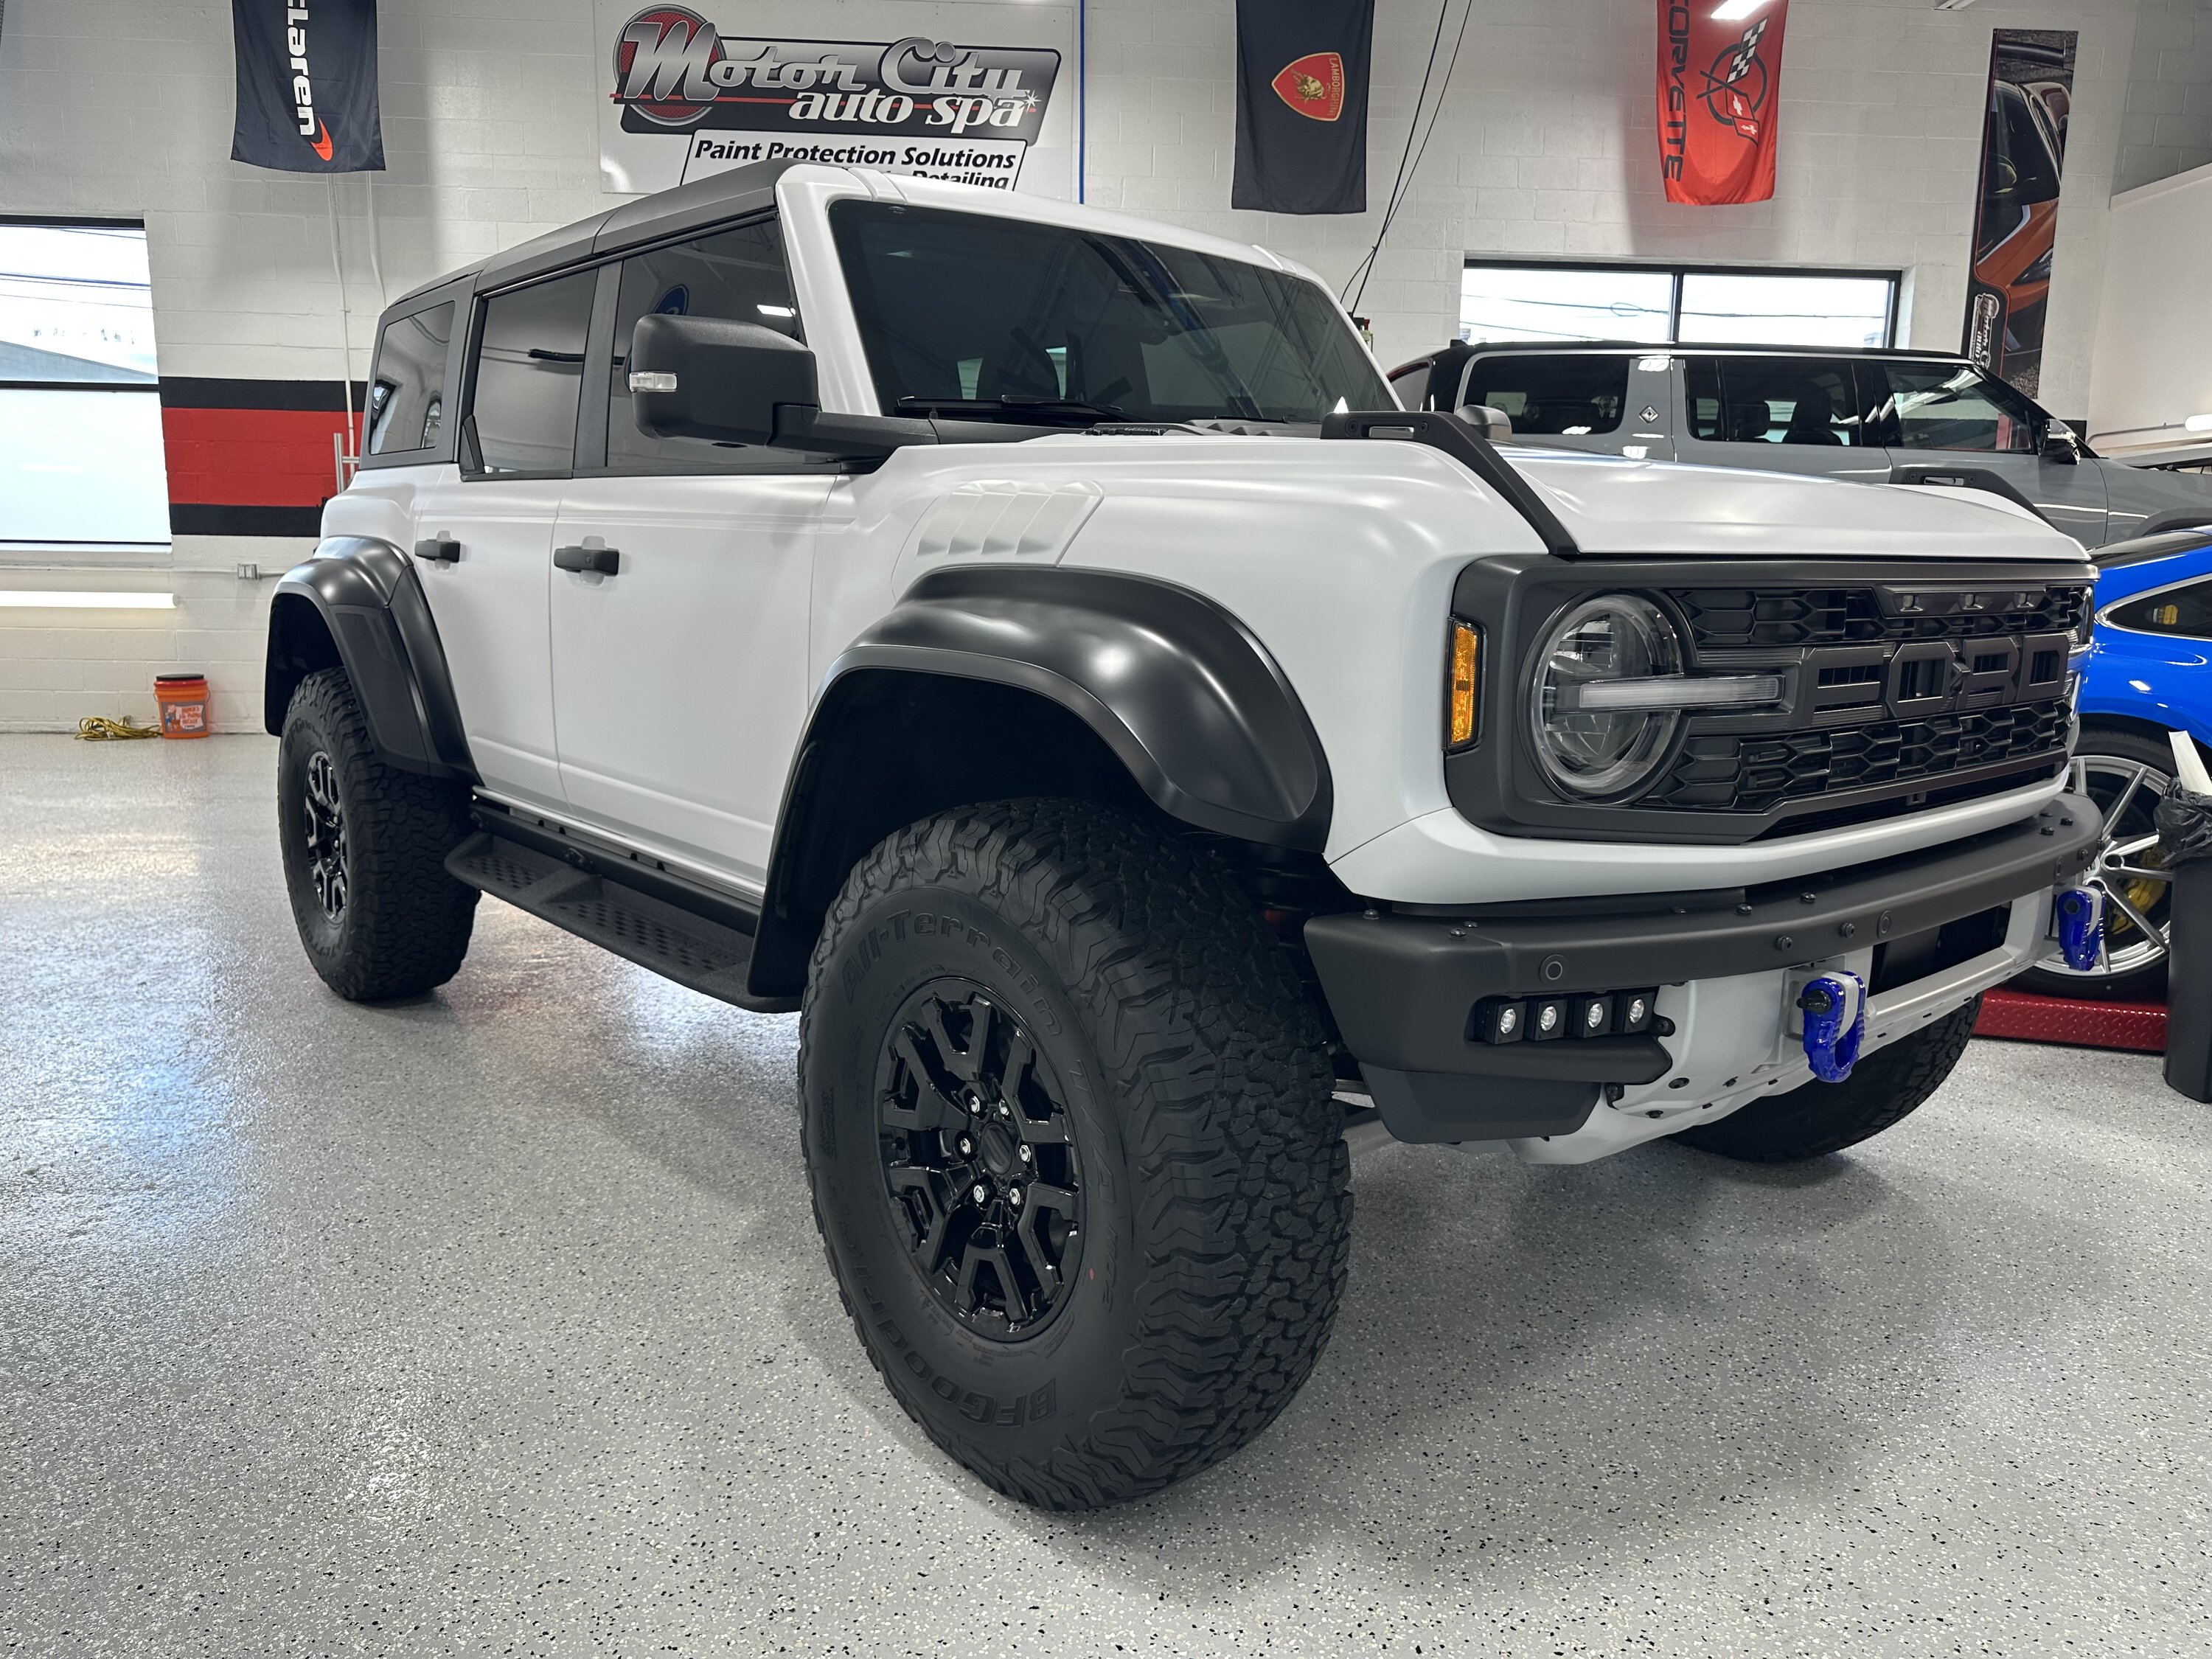 Ford Bronco XPEL Stealth PPF Wrap Completed on Bronco Raptor in Oxford White img_1173-jpe